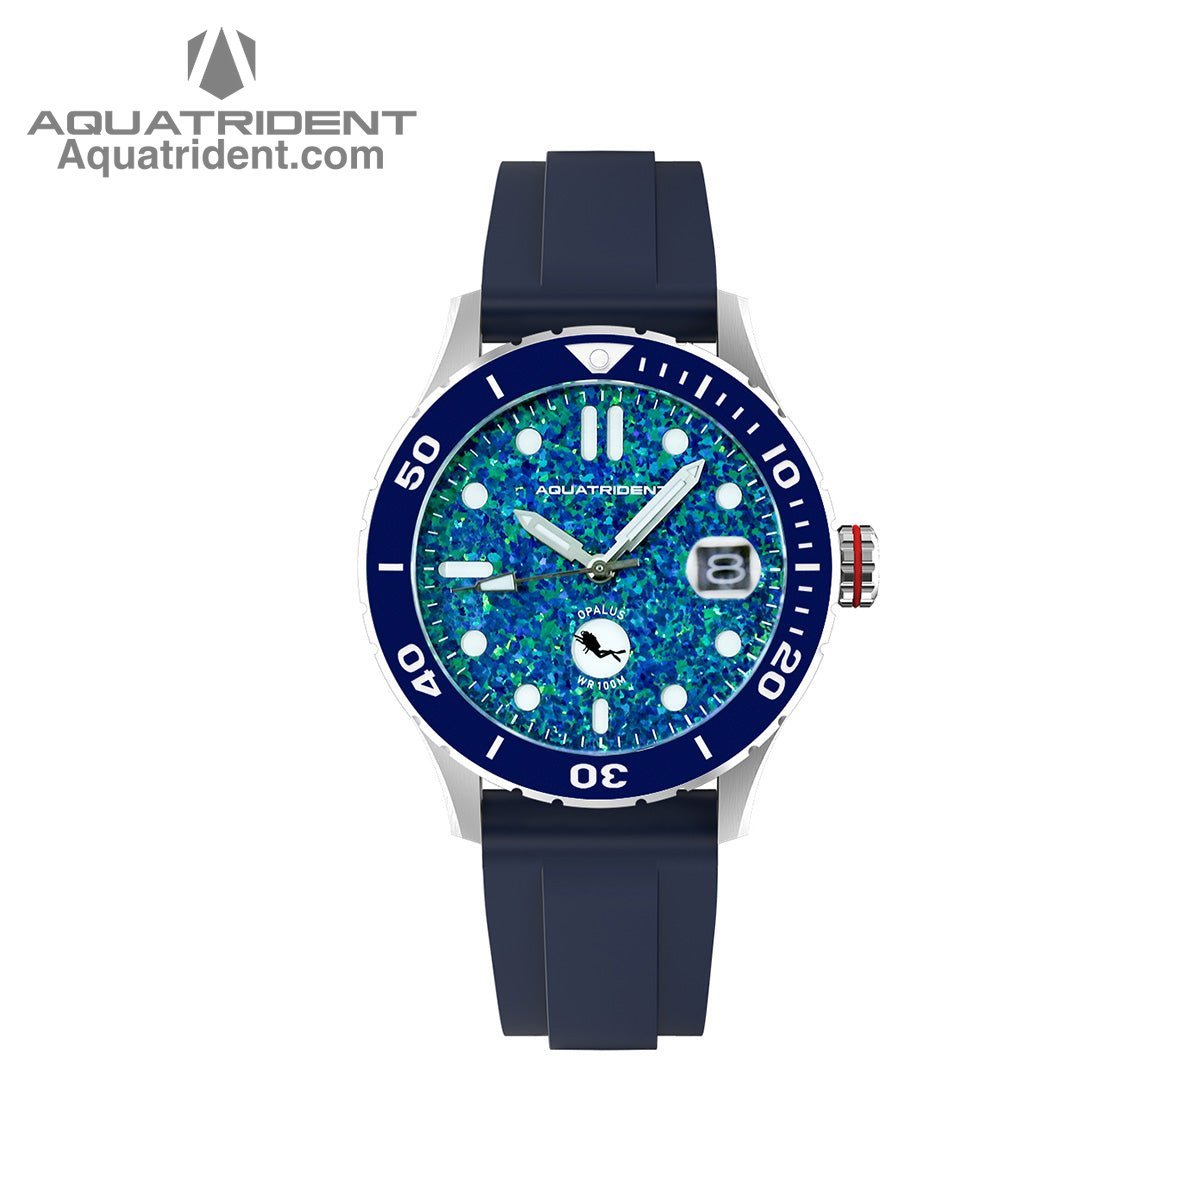 Aquatrident's Ocean Automatic Watch with Ceramic，Rotating, 120 clicks Bezel and deep blue opal Dial front view